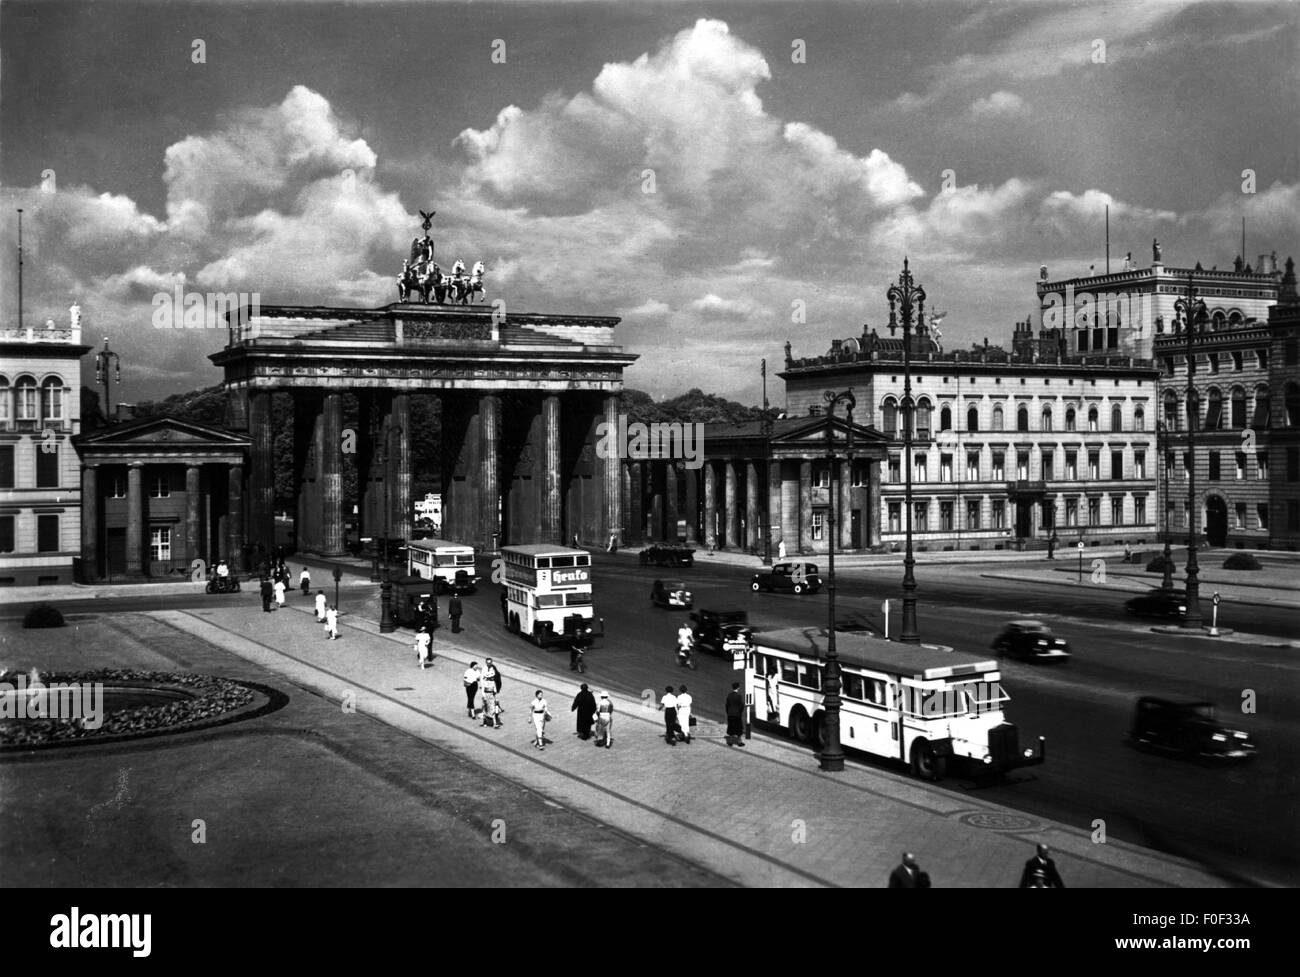 geography / travel, Germany, Berlin, square, Pariser Platz with Brandenburg Gate, late 1930s, 30s, 20th century, historic, historical, transport, transportation, street scene, street scenes, pedestrian, pedestrians, passer-by, passerby, passers-by, motor coach, quadriga, double decker, double-decker bus, double deckers, double-decker buses, double-decker busses, city traffic, metropolis, capital, capital city, capitals, capital cities, inner city, midtown, city centre, town centre, urban core, landmark, landmarks, people, nostalgia, Additional-Rights-Clearences-Not Available Stock Photo